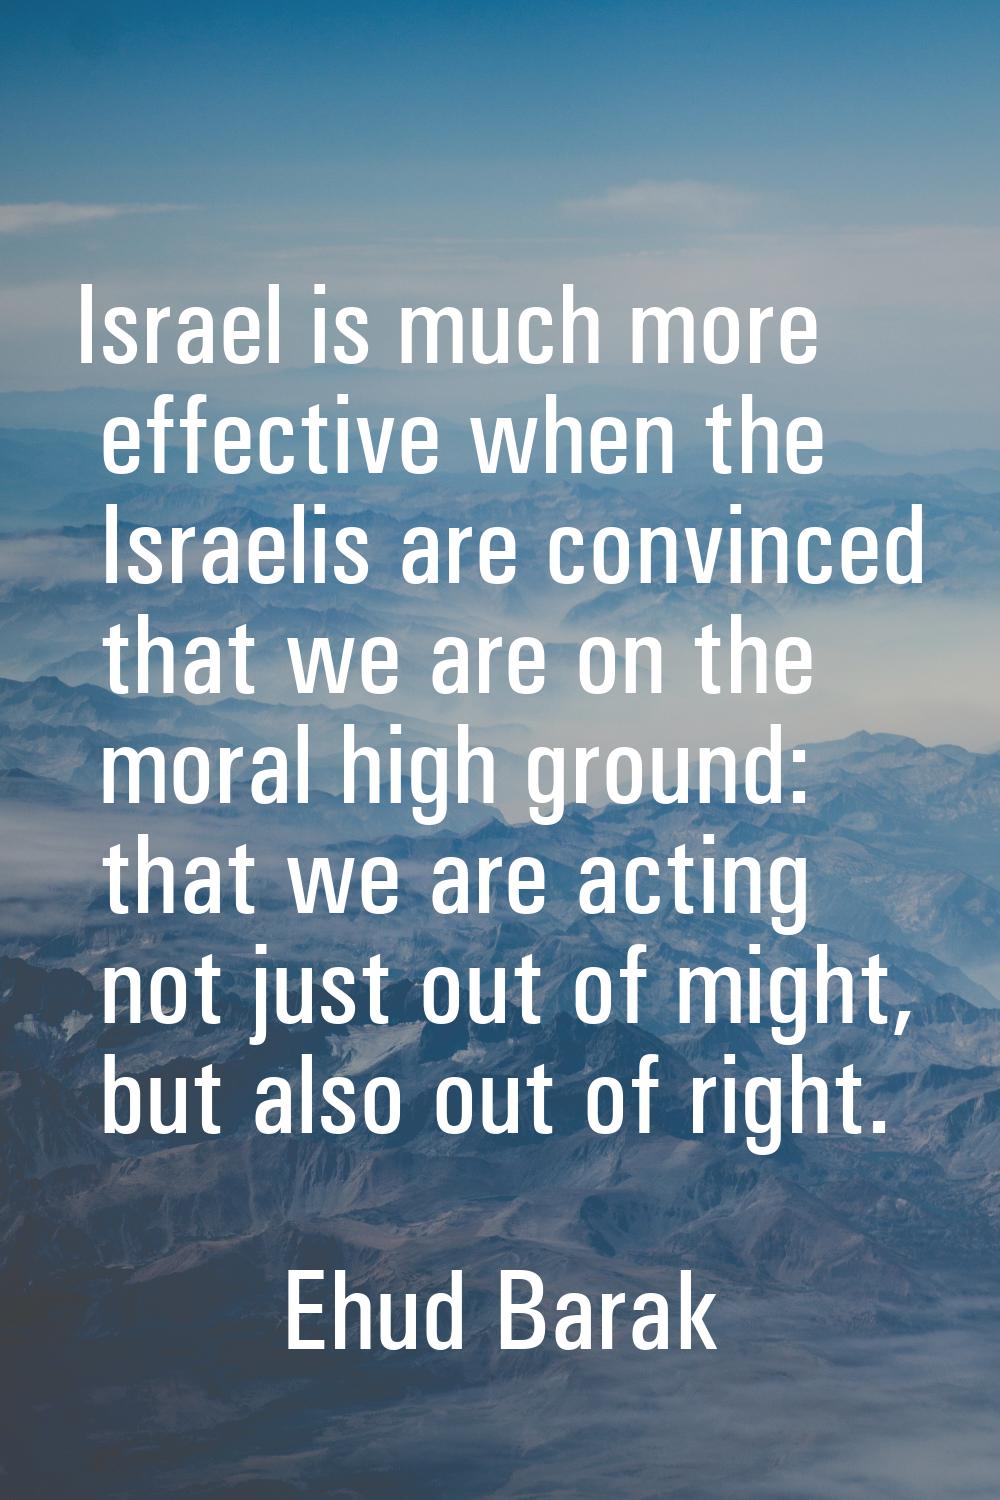 Israel is much more effective when the Israelis are convinced that we are on the moral high ground: